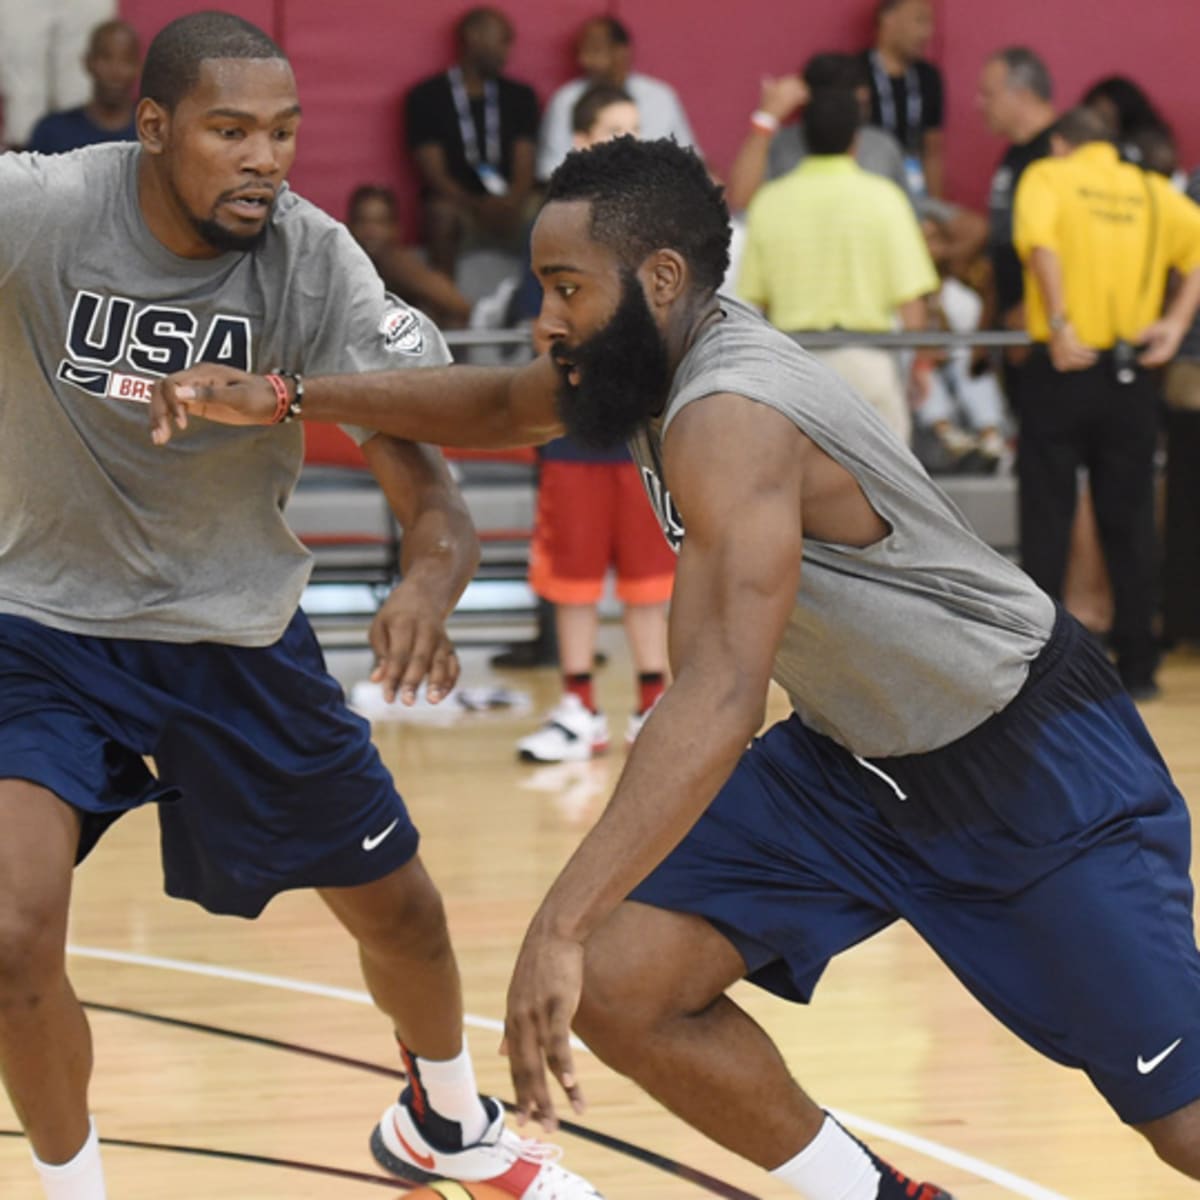 Rose, Kyrie to Alternate Starts For Team USA in World Cup